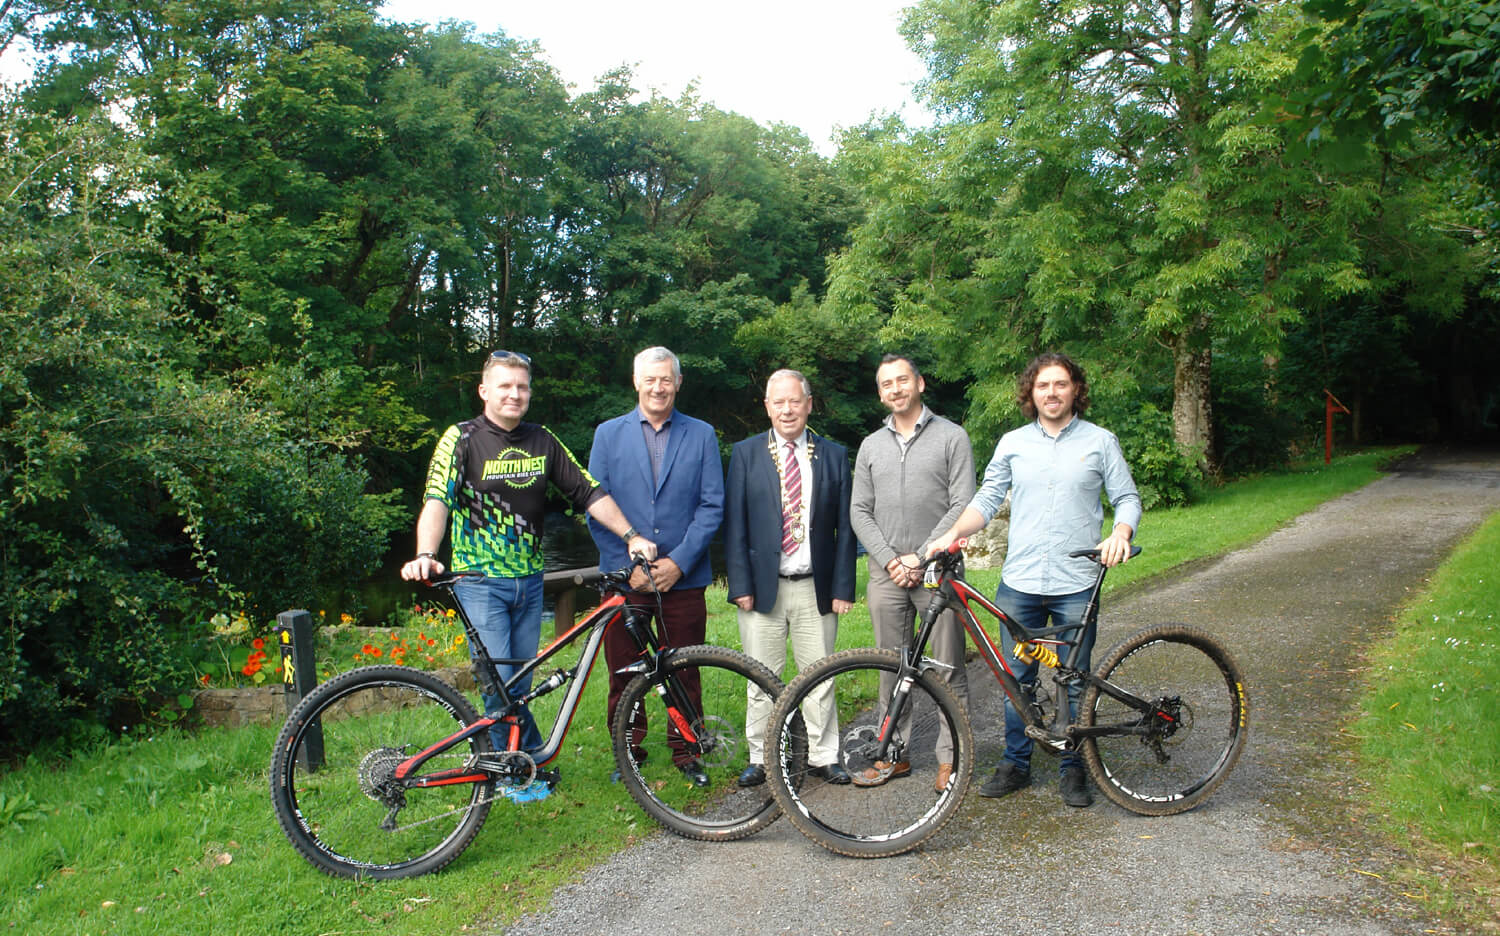 Major Funding for Rural Recreation Projects in County Sligo